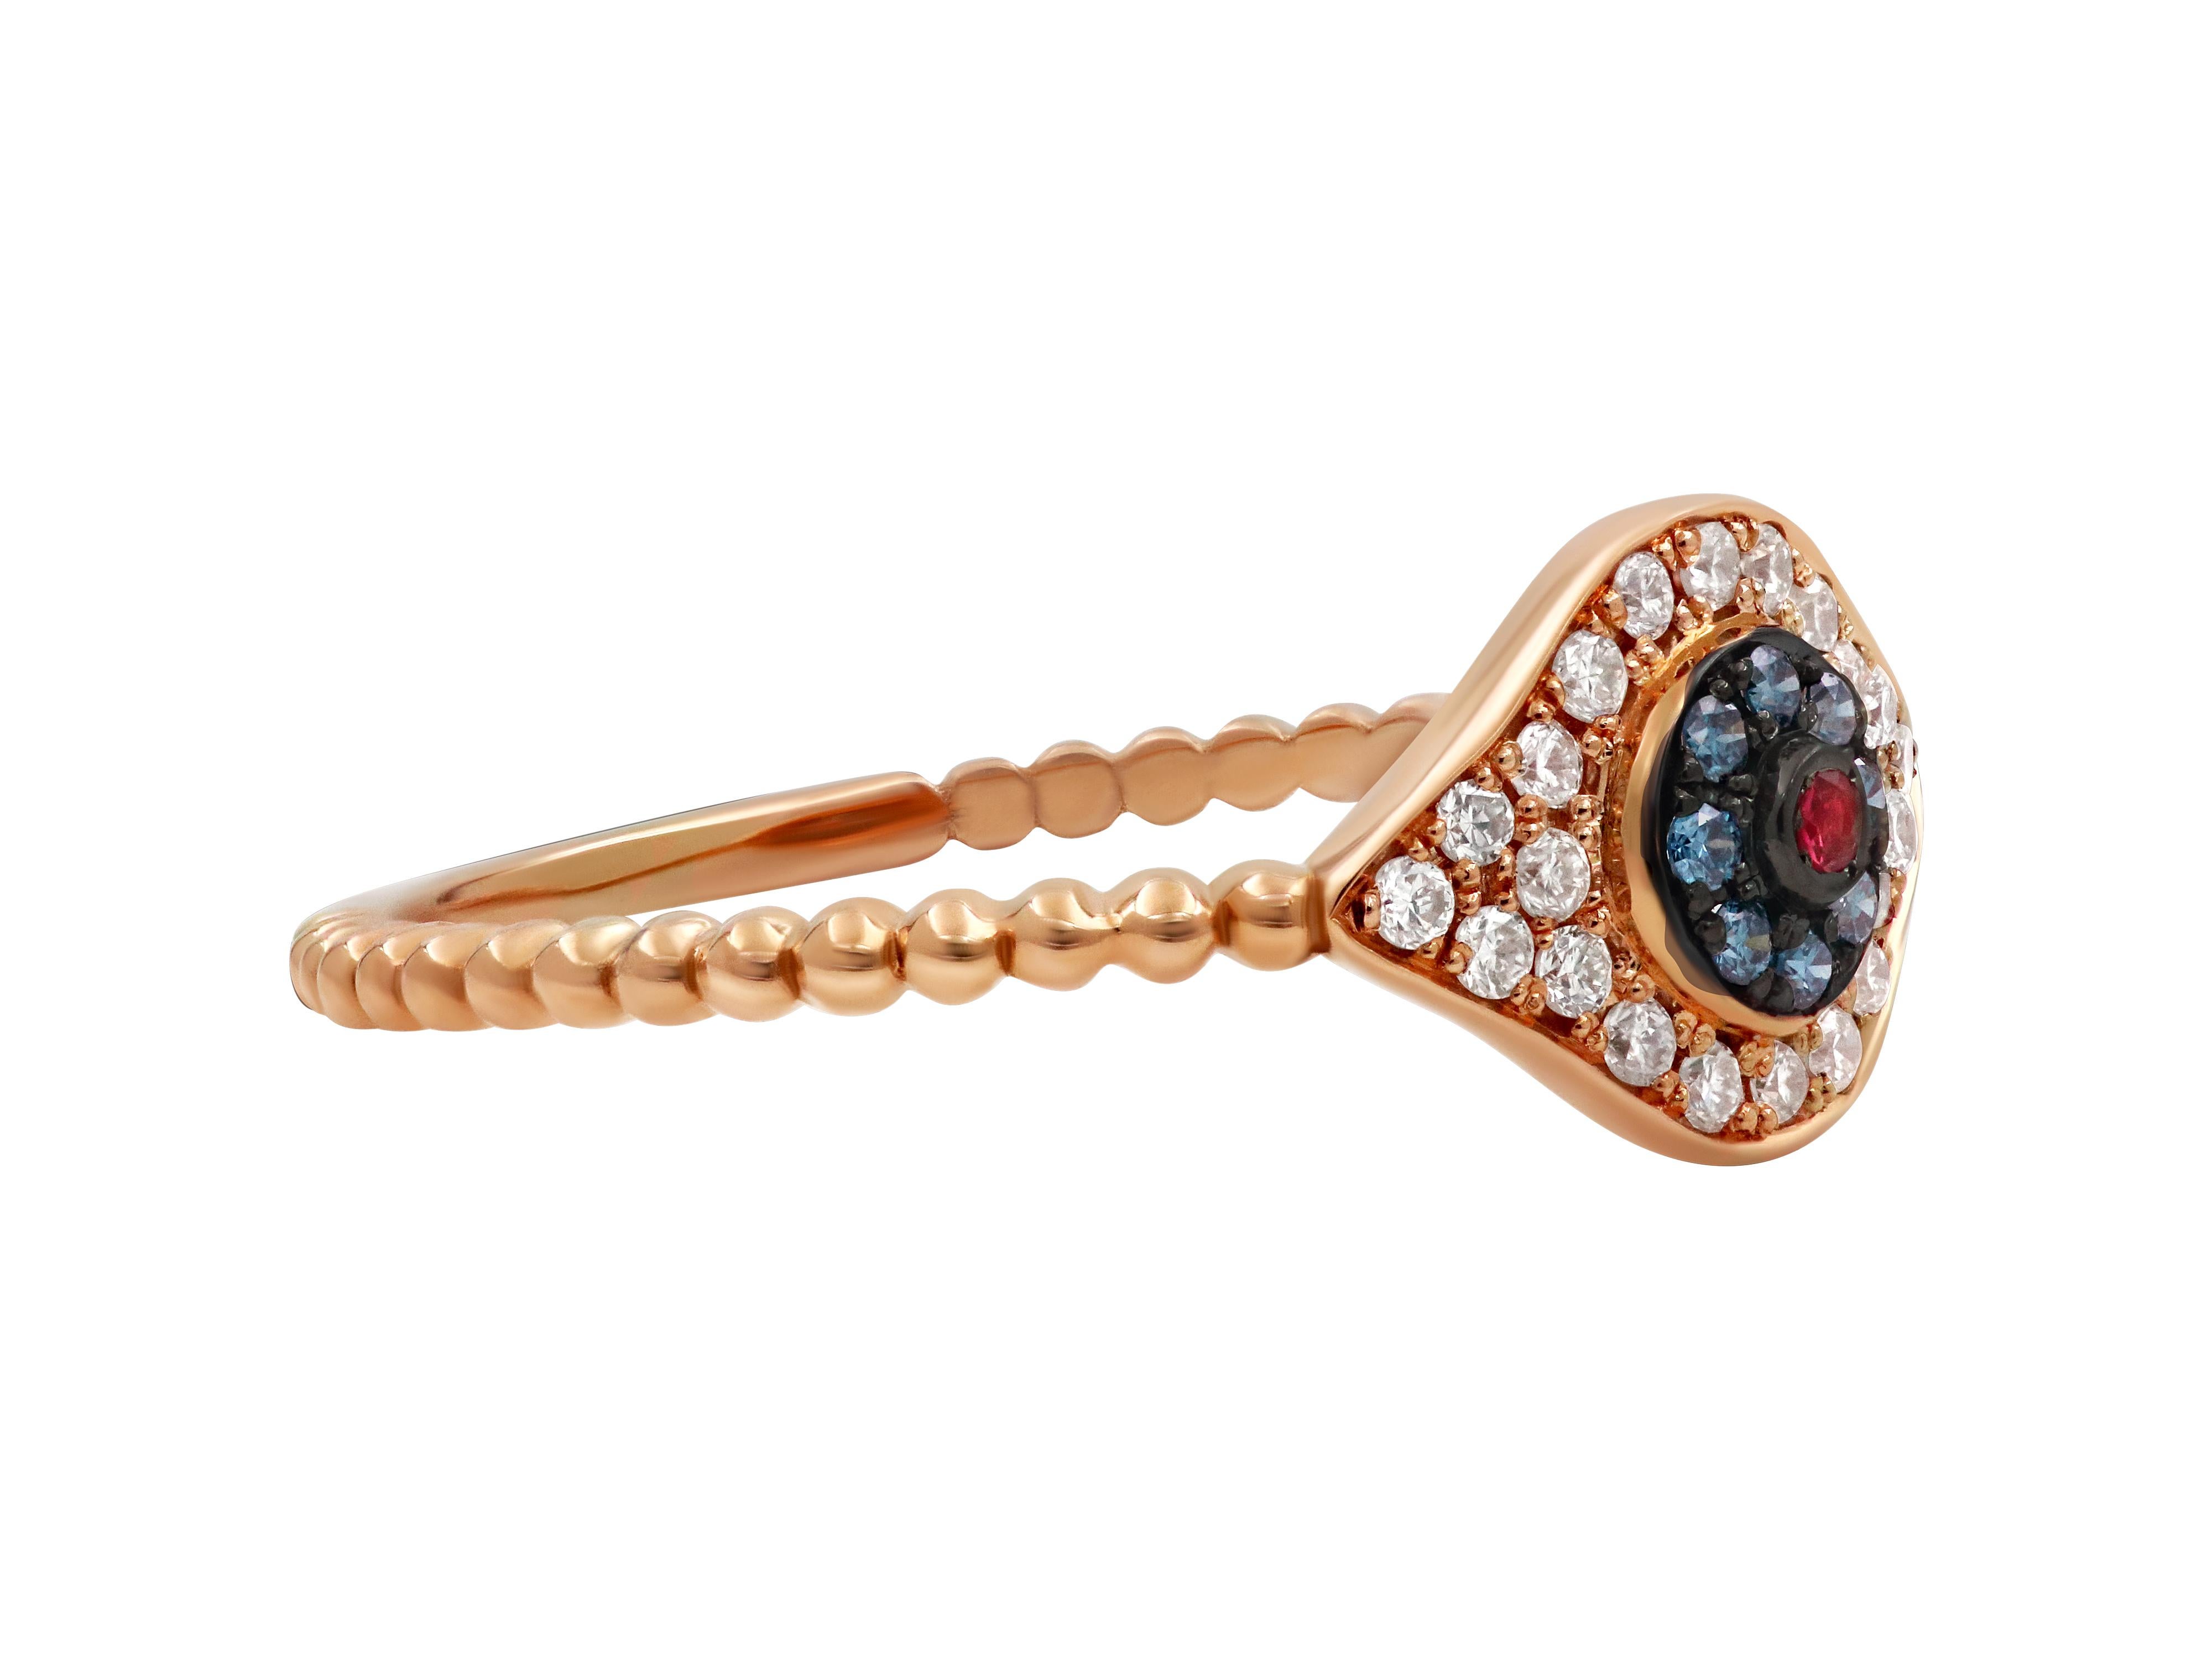 Dainty evil eye ring set in 18k rose gold with 0.01 carats ruby, 0.03 carats blue diamonds and 0.119 brilliant cut white diamonds.

Ring face: 0.314X0.393